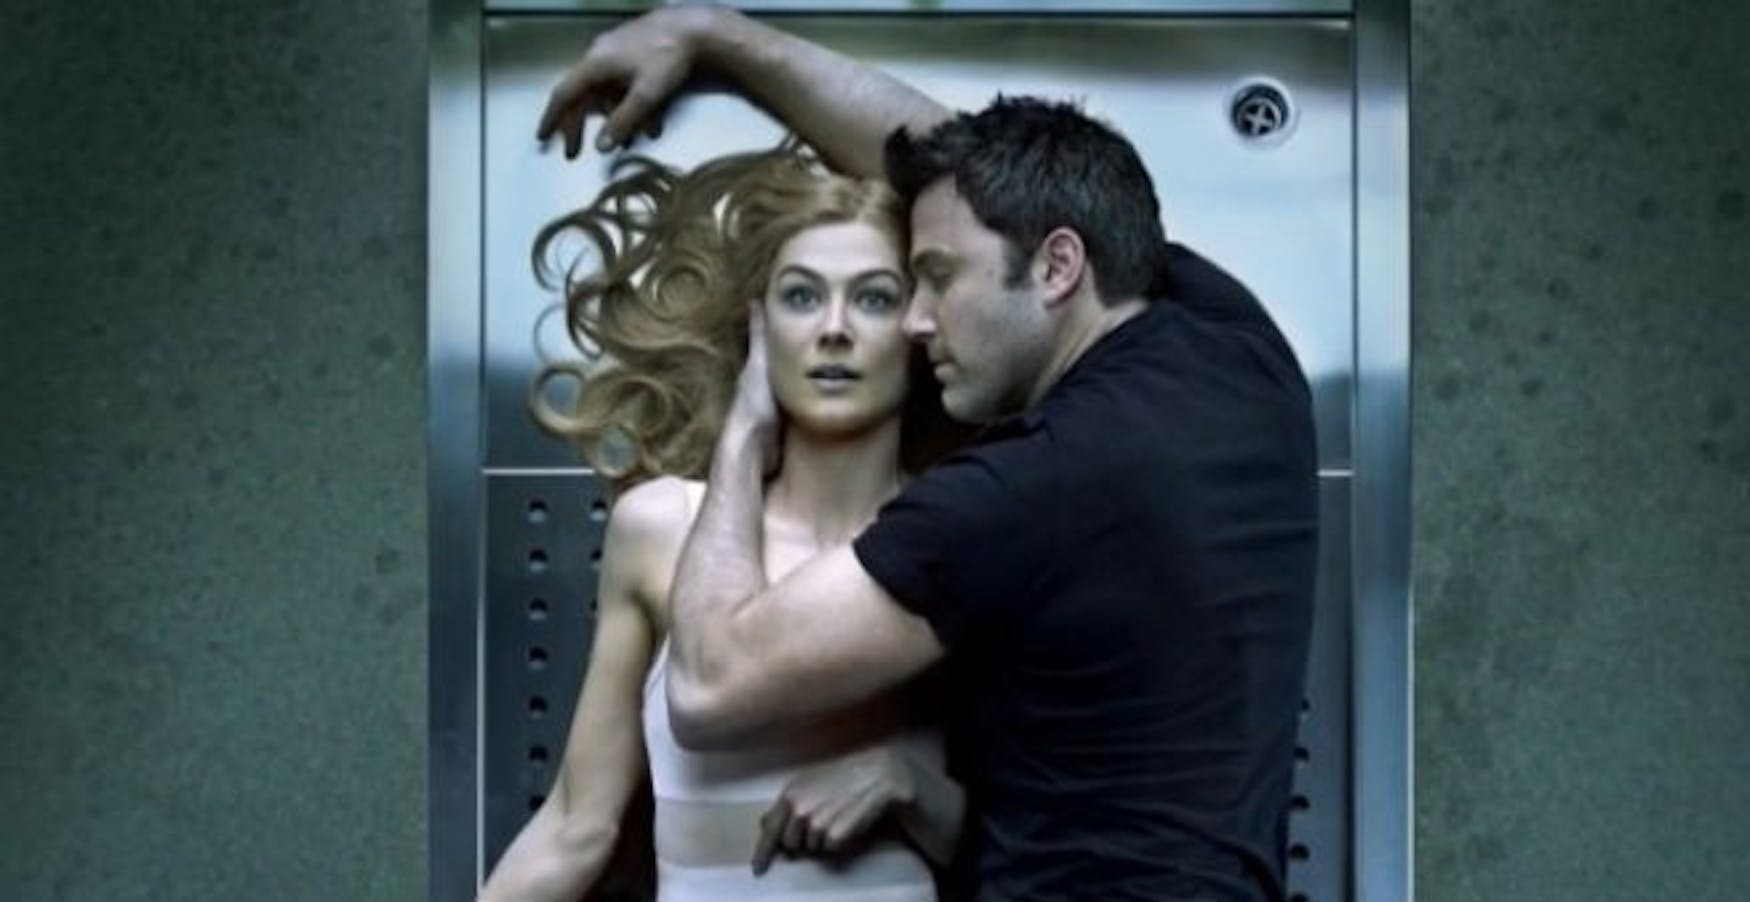 TURNING COLD: Gone Girl delves deep into the marriage of Nick Dunne (Ben Affleck) and his wife, Amy (Rosamund Pike), as a story unfolds about finding Amy, who has gone missing.